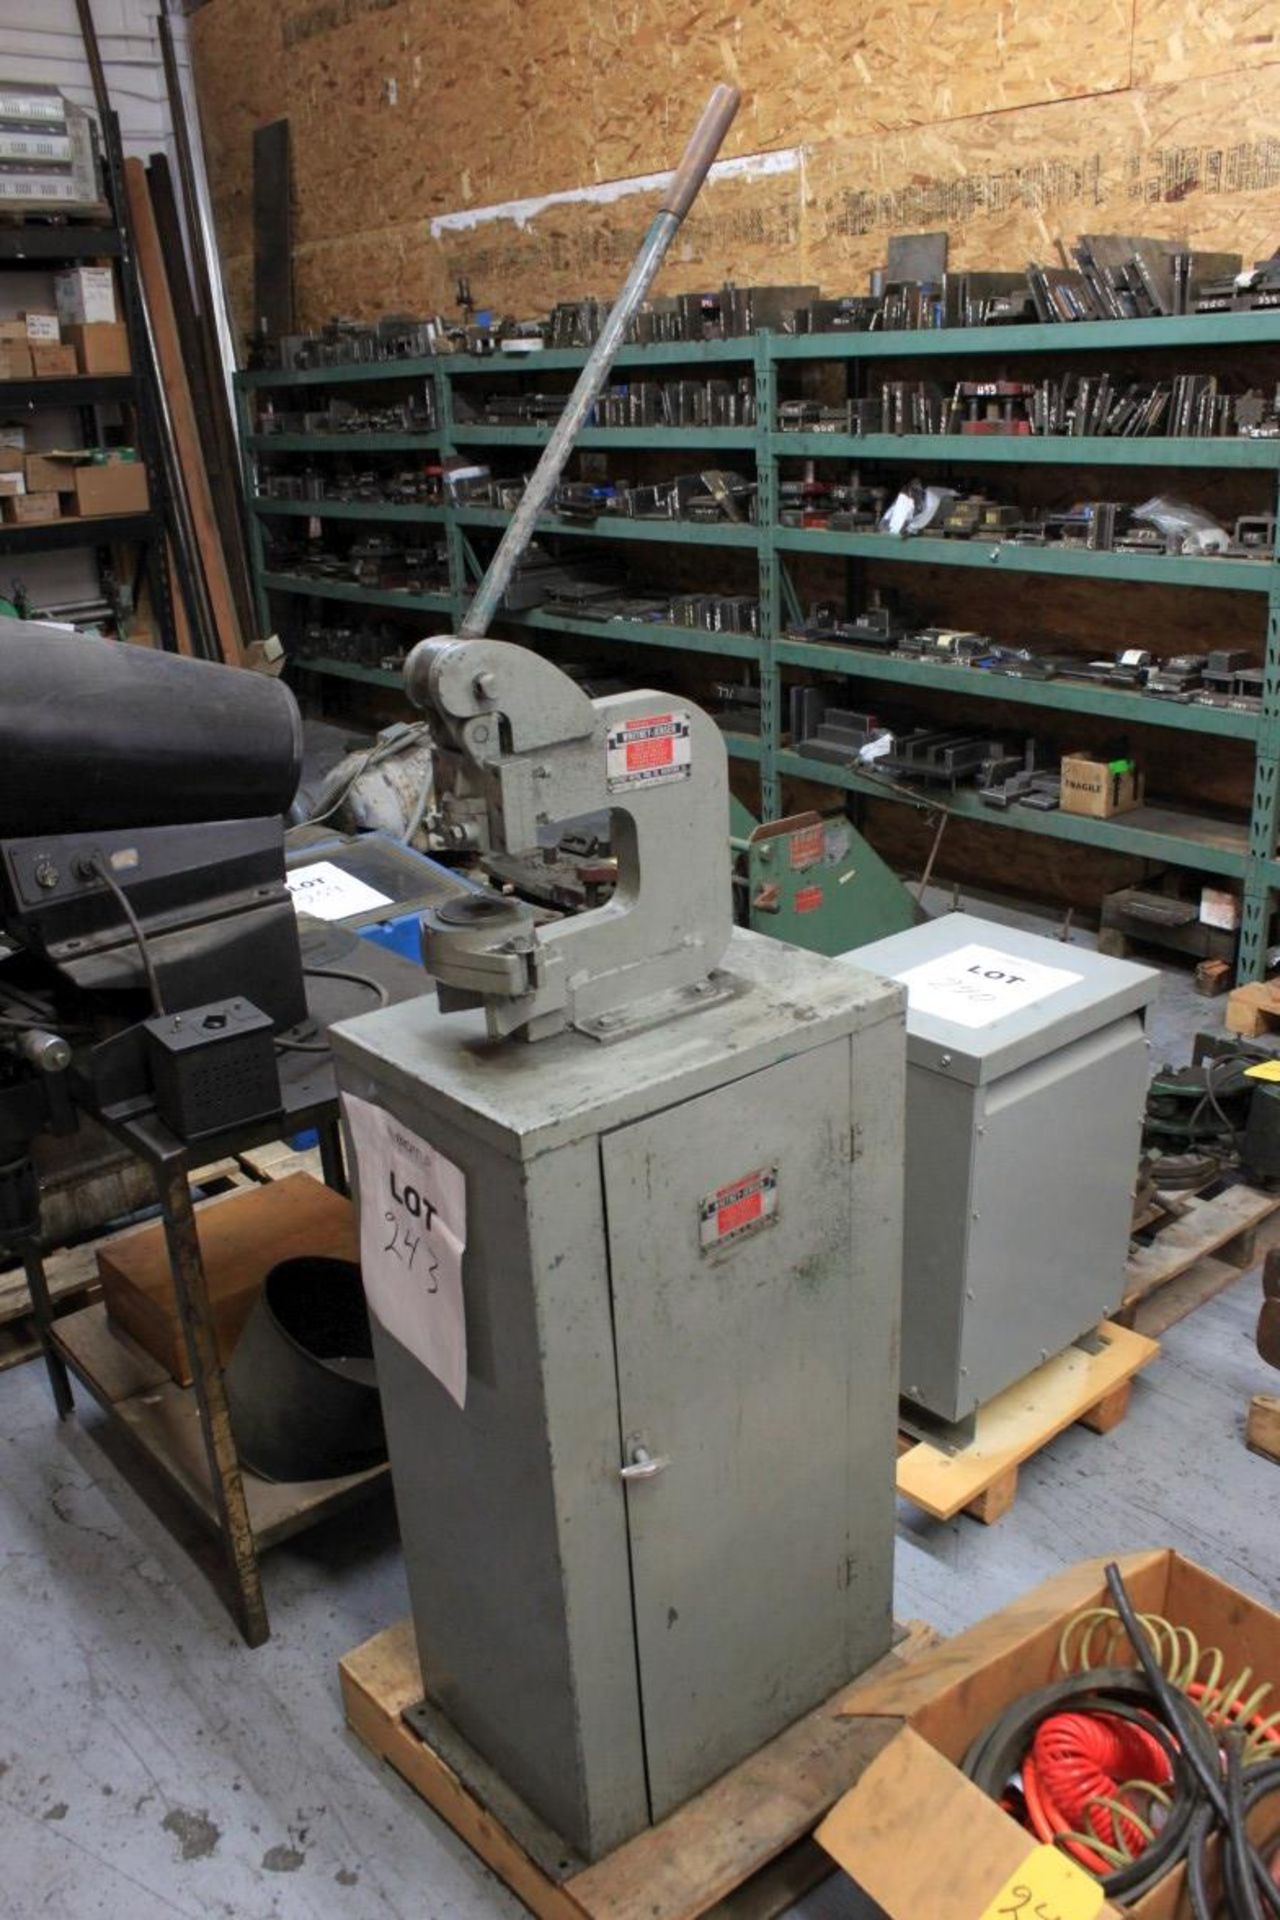 Whitney-Jensen 4 Ton Hand Punch Press, Model 118, S/N 943164 (Located at 26555 Ruether Avenue, Santa